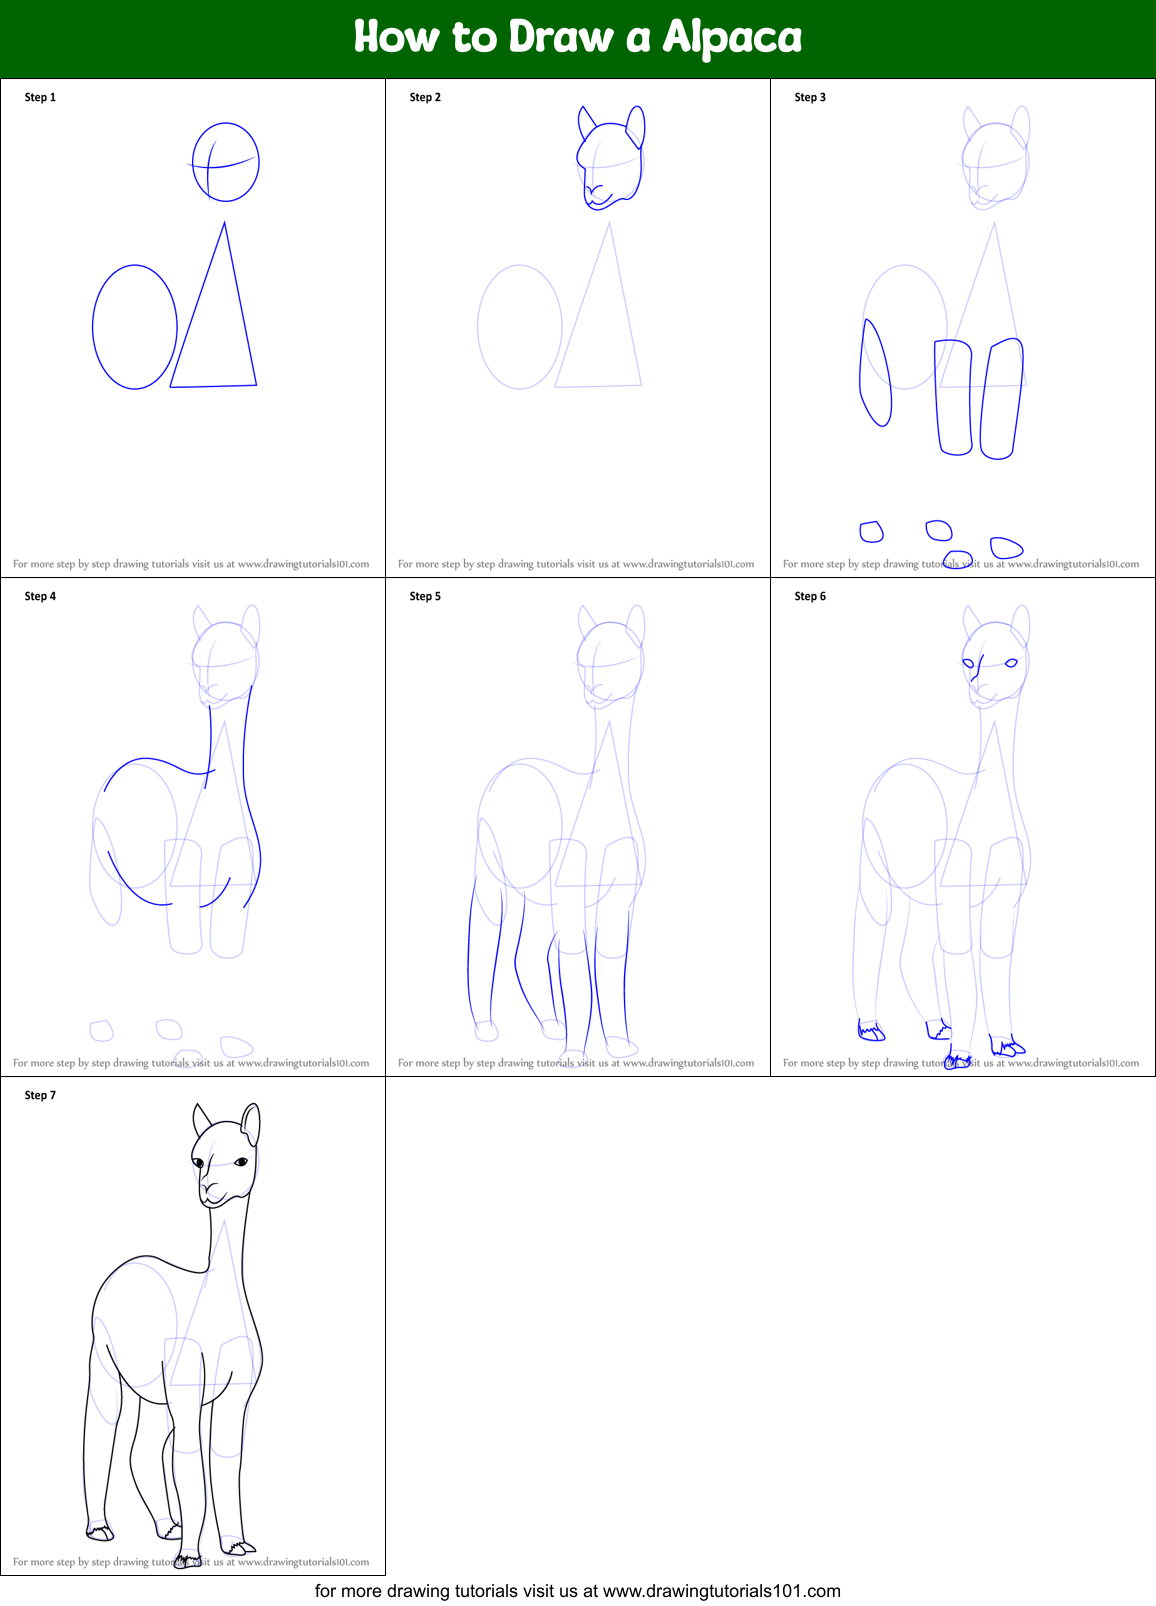 How to Draw a Alpaca printable step by step drawing sheet